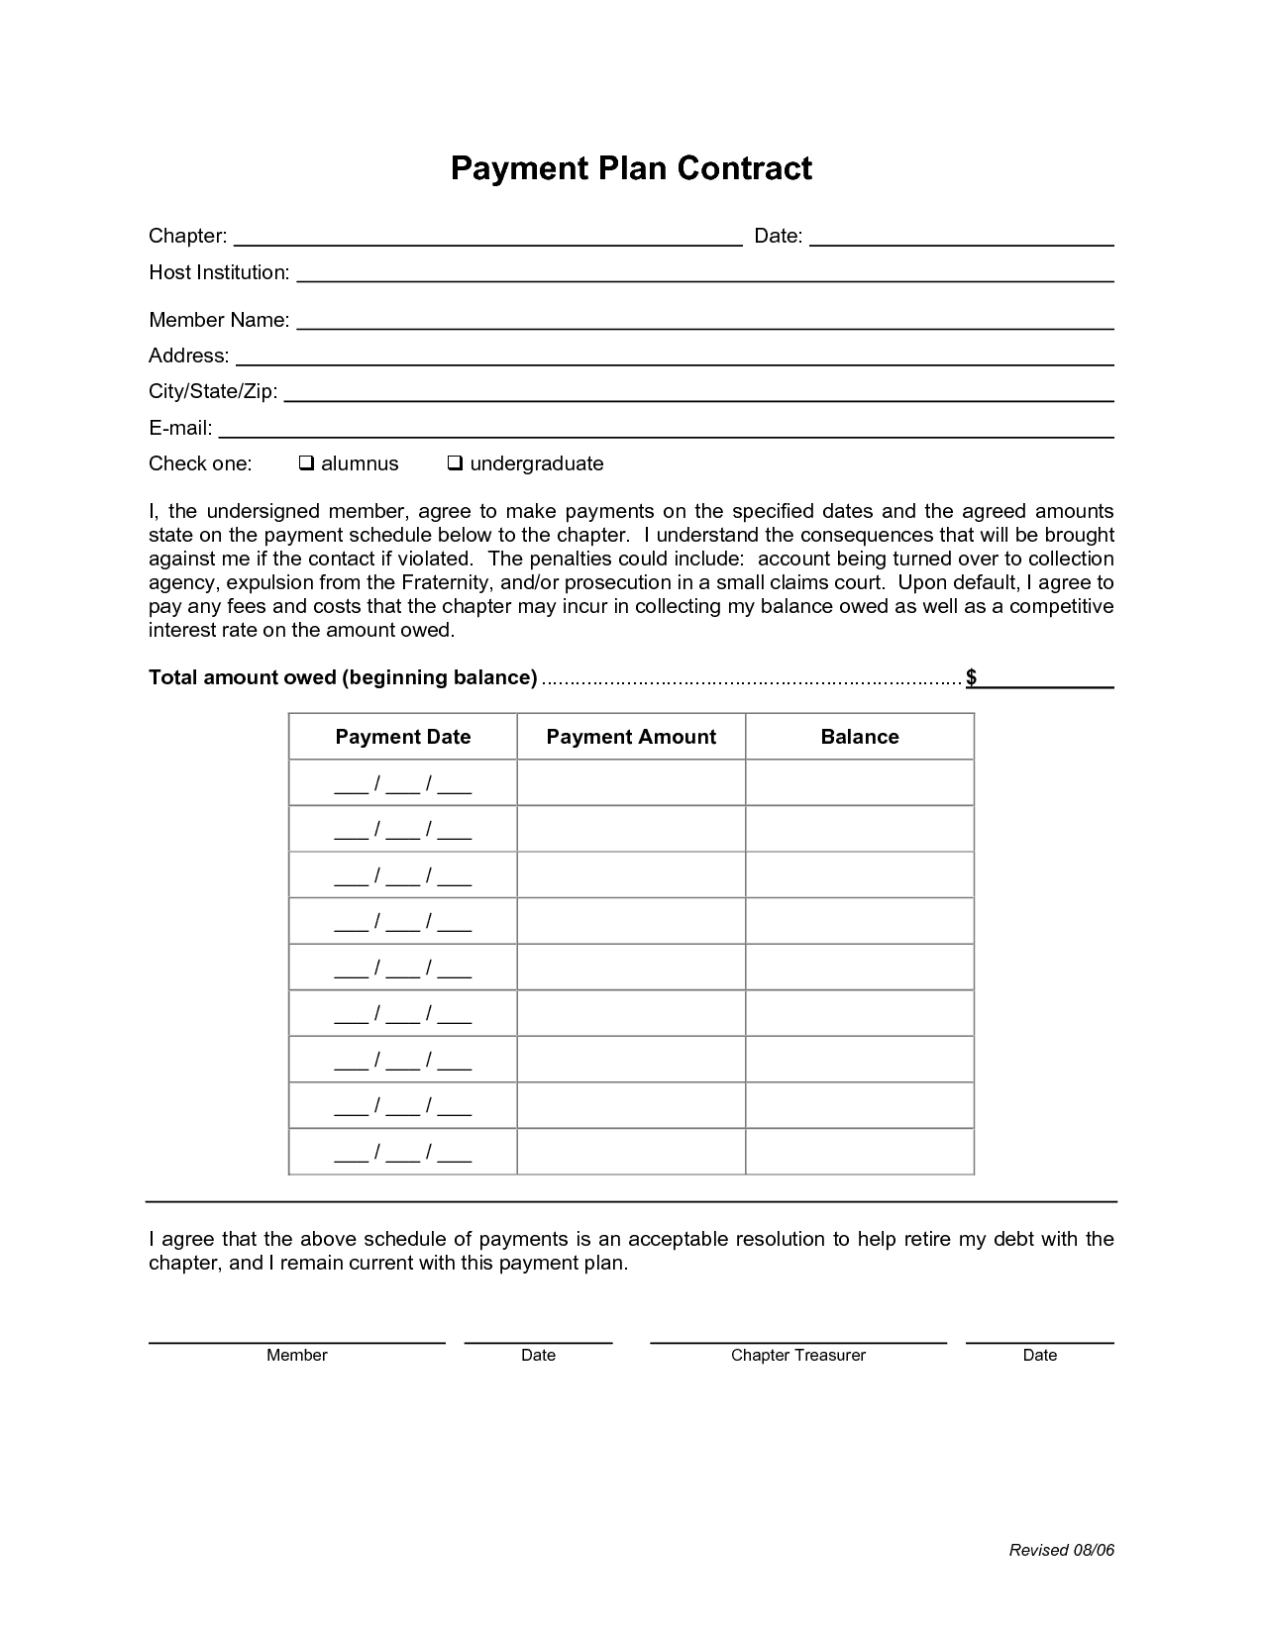 Payment Plan Agreement Templates - Word Excel Samples Inside Laptop Loan Agreement Template